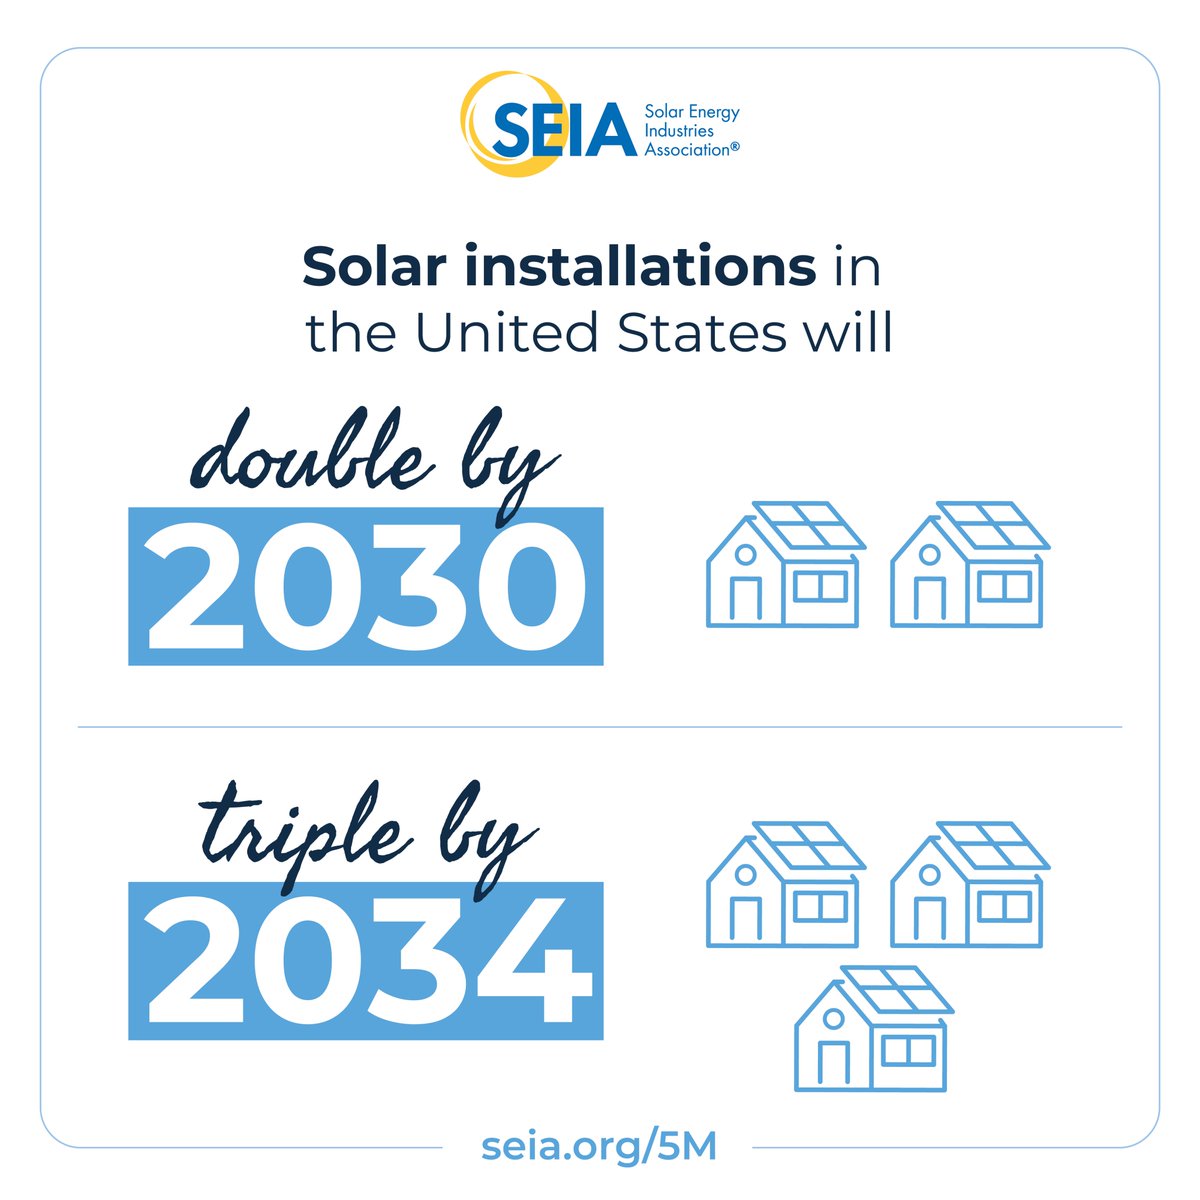 More than 263,000 Americans work in #solar, with 500 Nexamp team members and our hundreds of contractors playing a major role. #SolarPowers a growing number of high-quality jobs from coast to coast. Hear from @SEIA on solar’s latest milestone: seia.org/news/5million